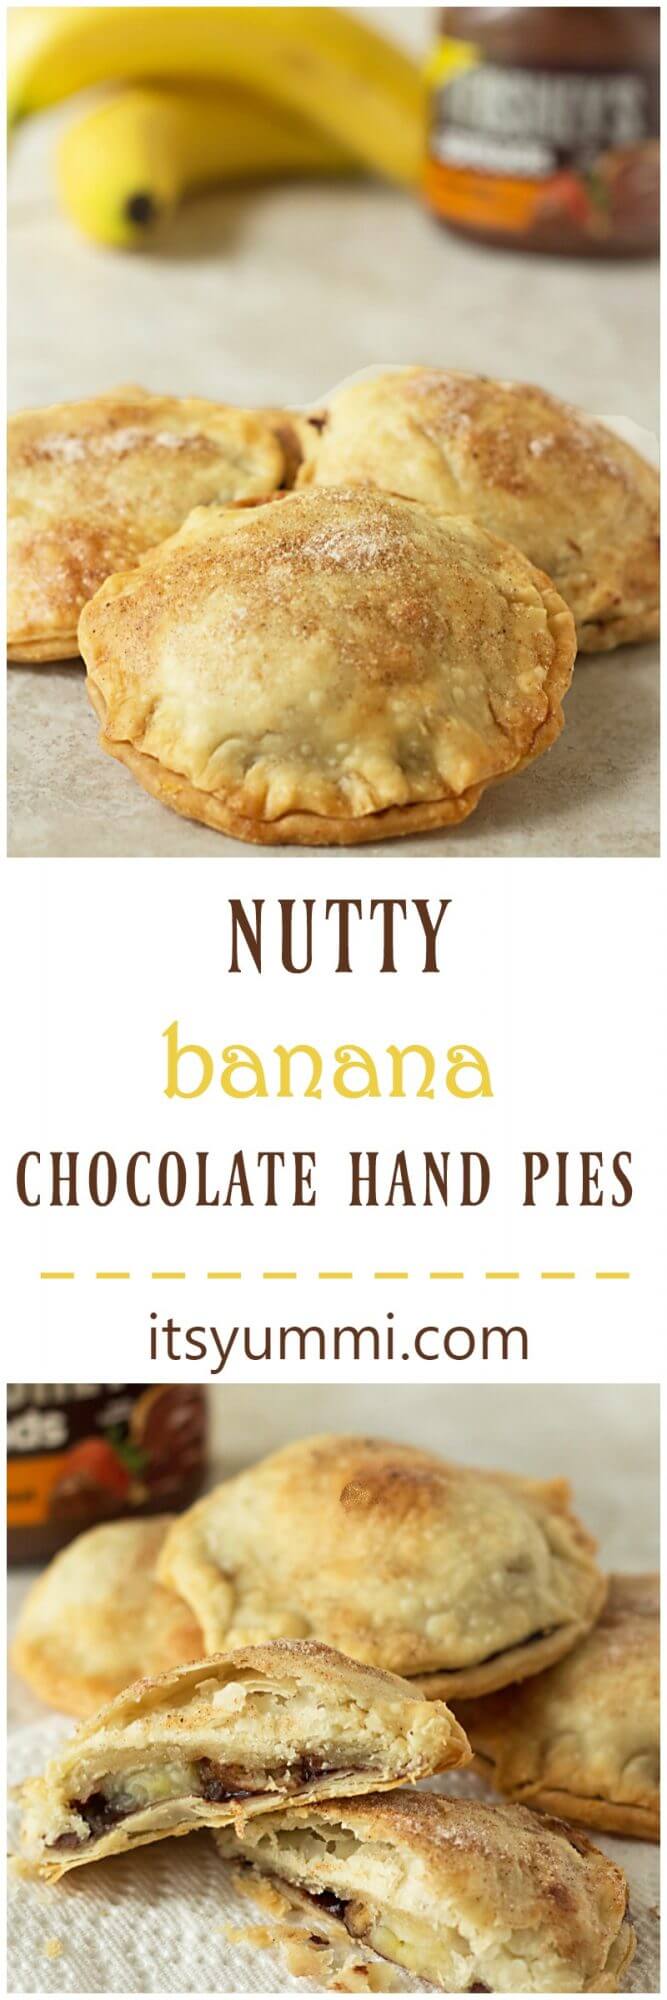 Nutty Banana Chocolate Hand Pies - A sweet treat! Flaky pastry is full of chocolate hazelnut spread, bananas, and chopped nuts. Get the recipe from @itsyummi